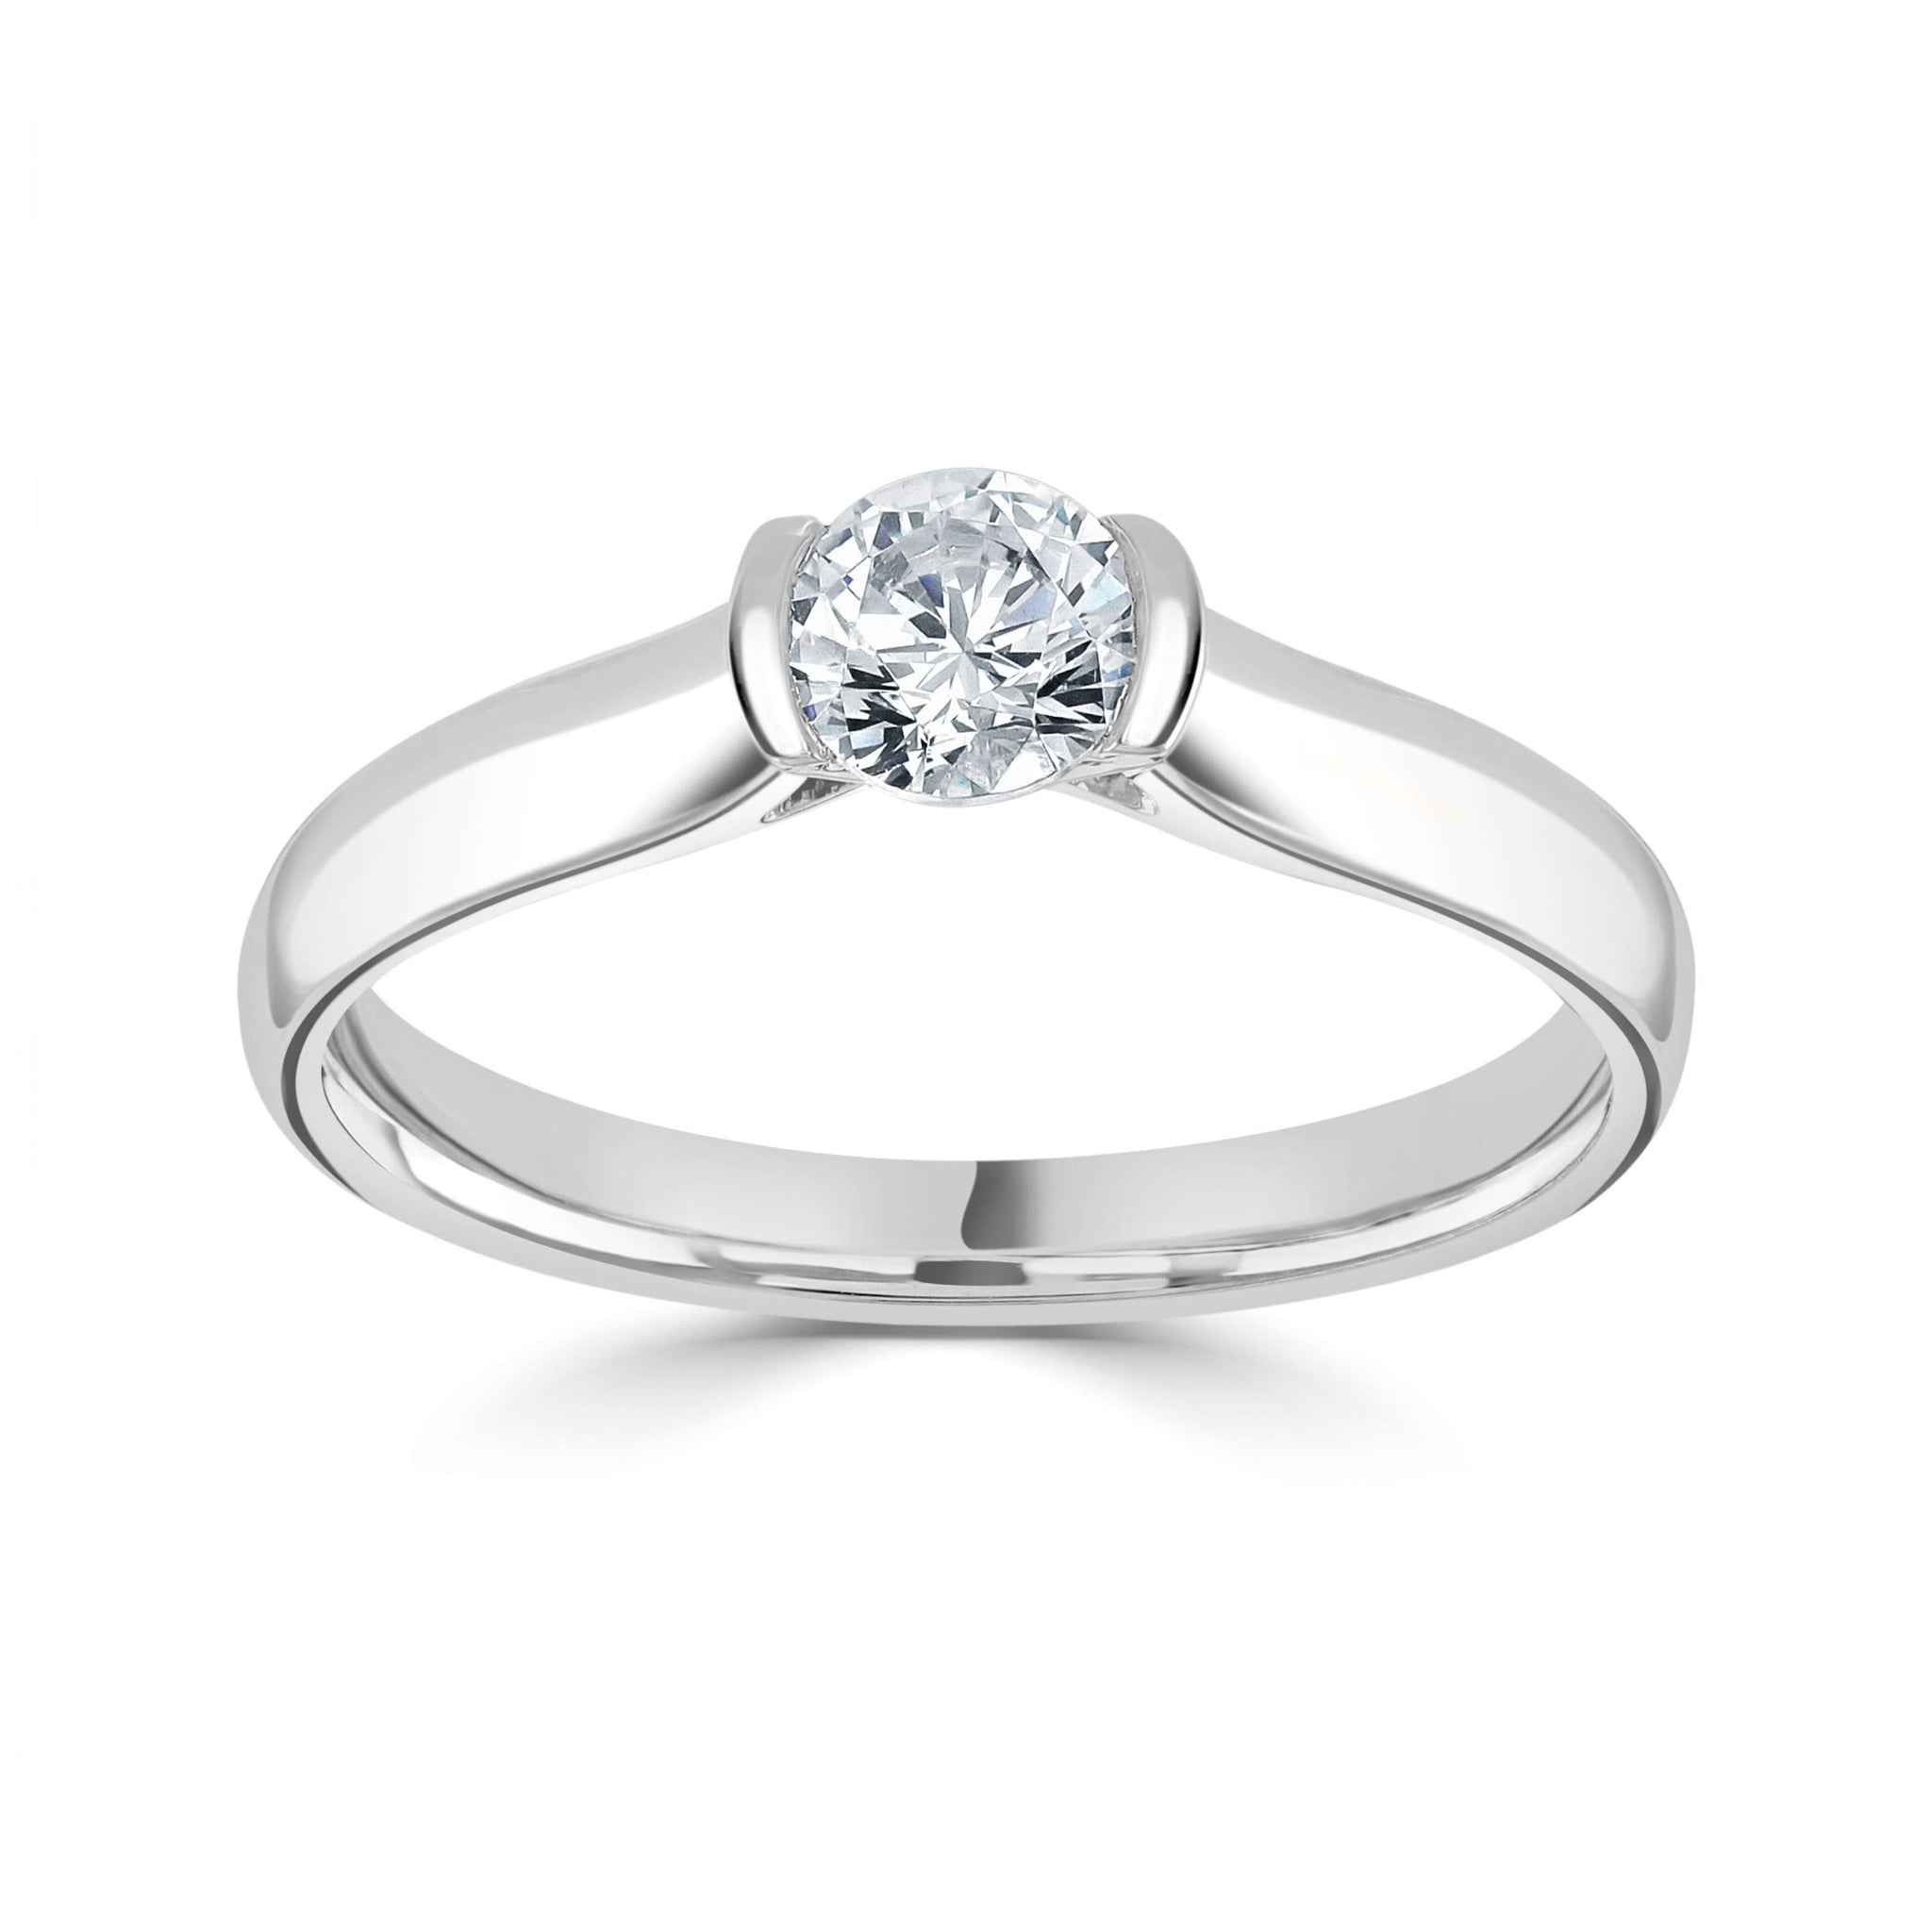 Keira *Select a Round Diamond 0.25ct or above